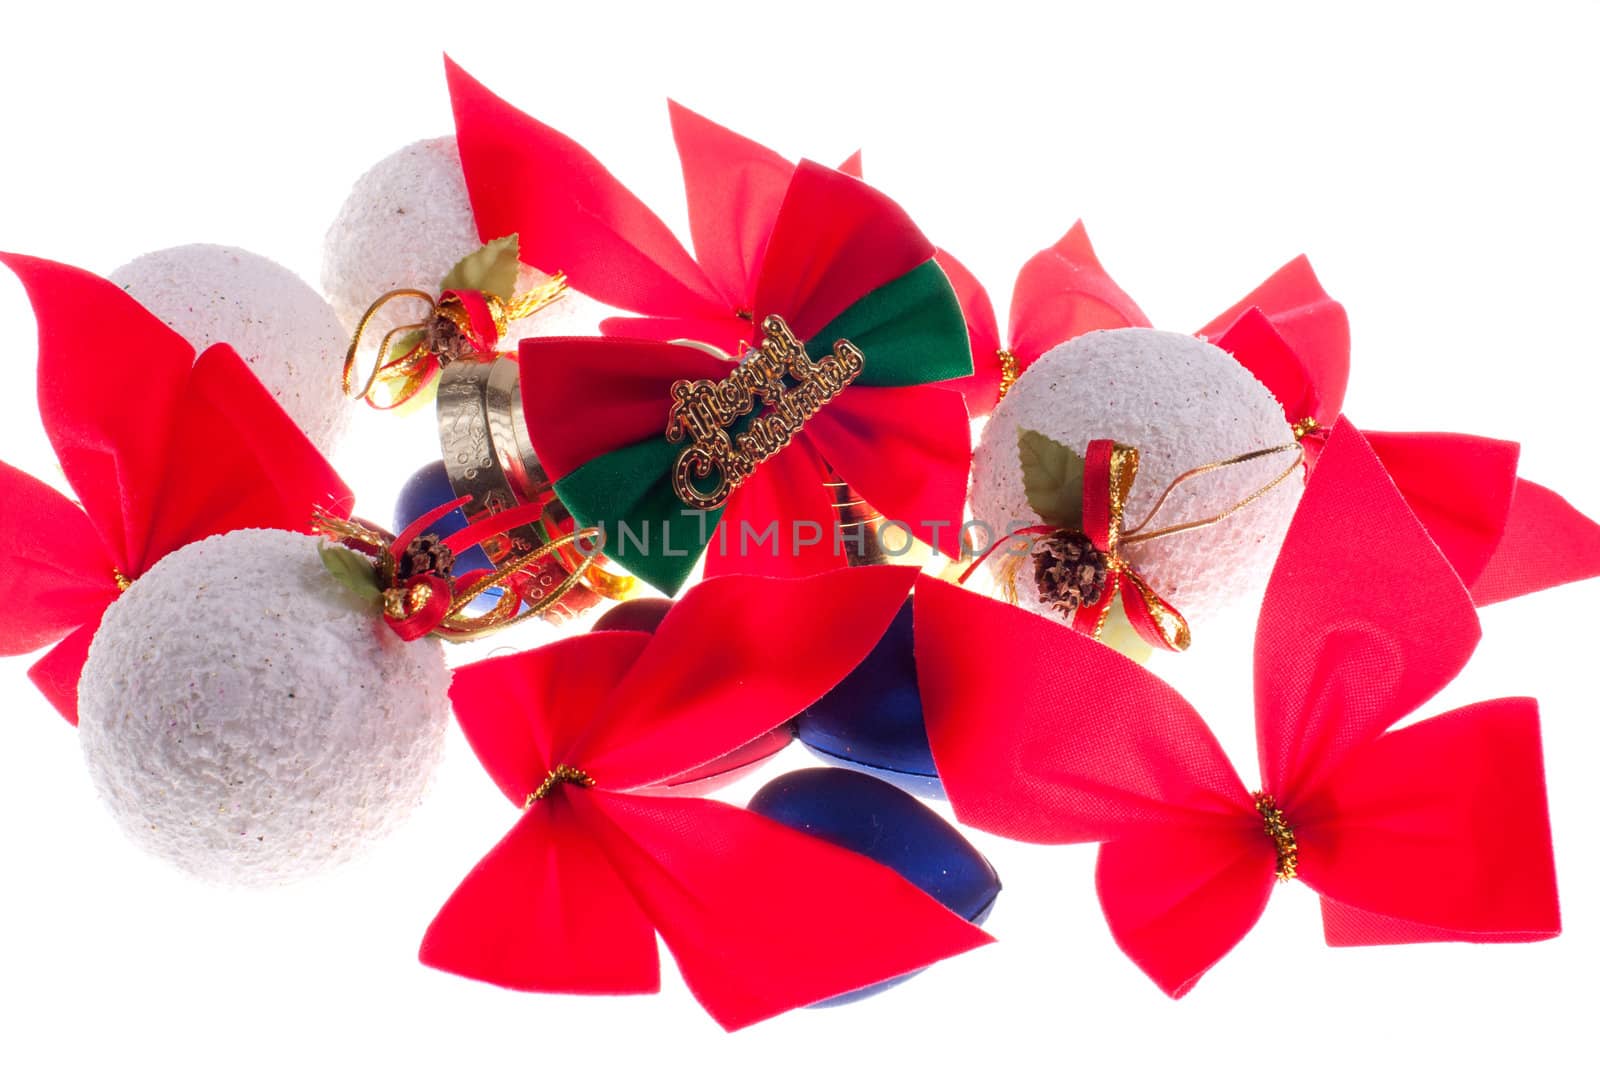 Christmas baubles and other decorations on a white background